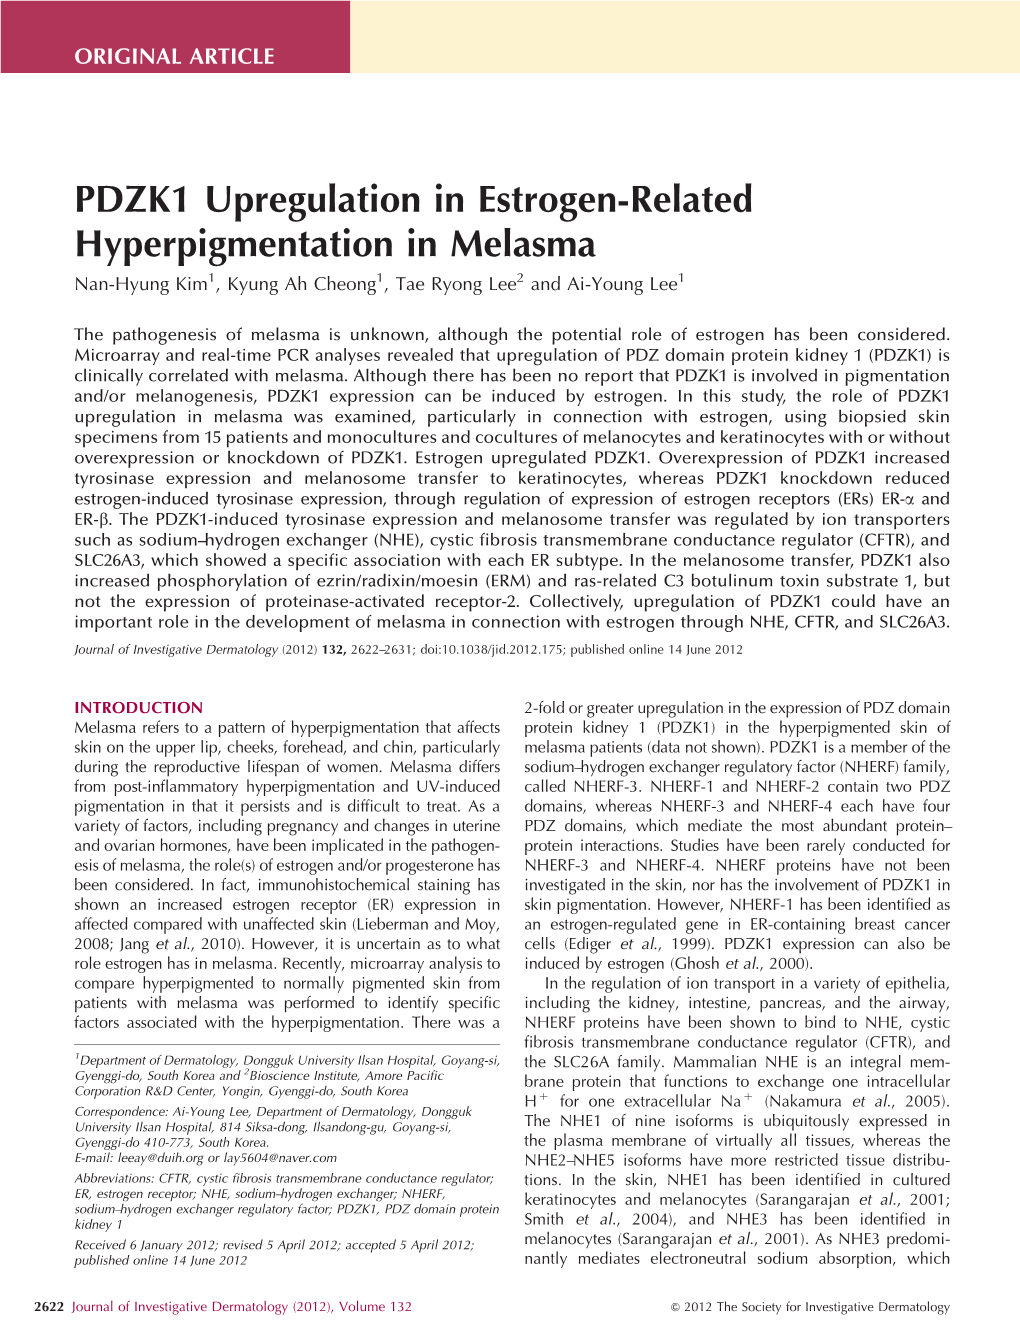 PDZK1 Upregulation in Estrogen-Related Hyperpigmentation in Melasma Nan-Hyung Kim1, Kyung Ah Cheong1, Tae Ryong Lee2 and Ai-Young Lee1